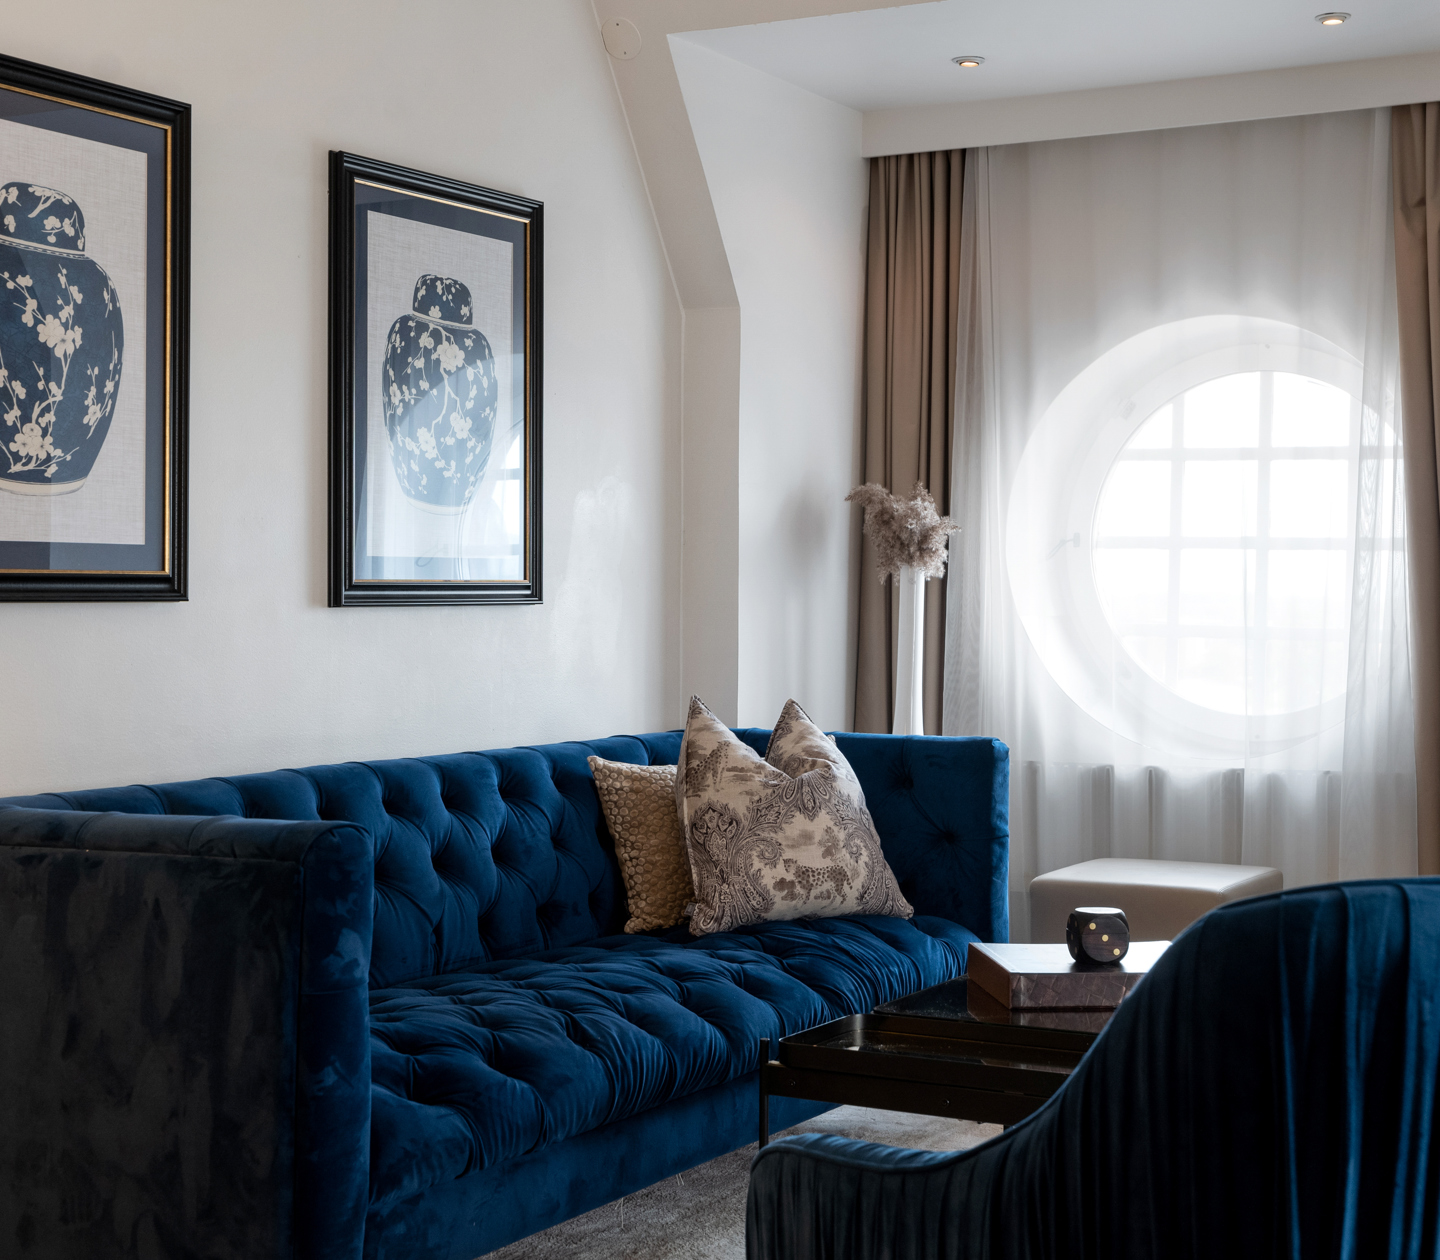 Hotel room with blue sofa group and a beautiful round window